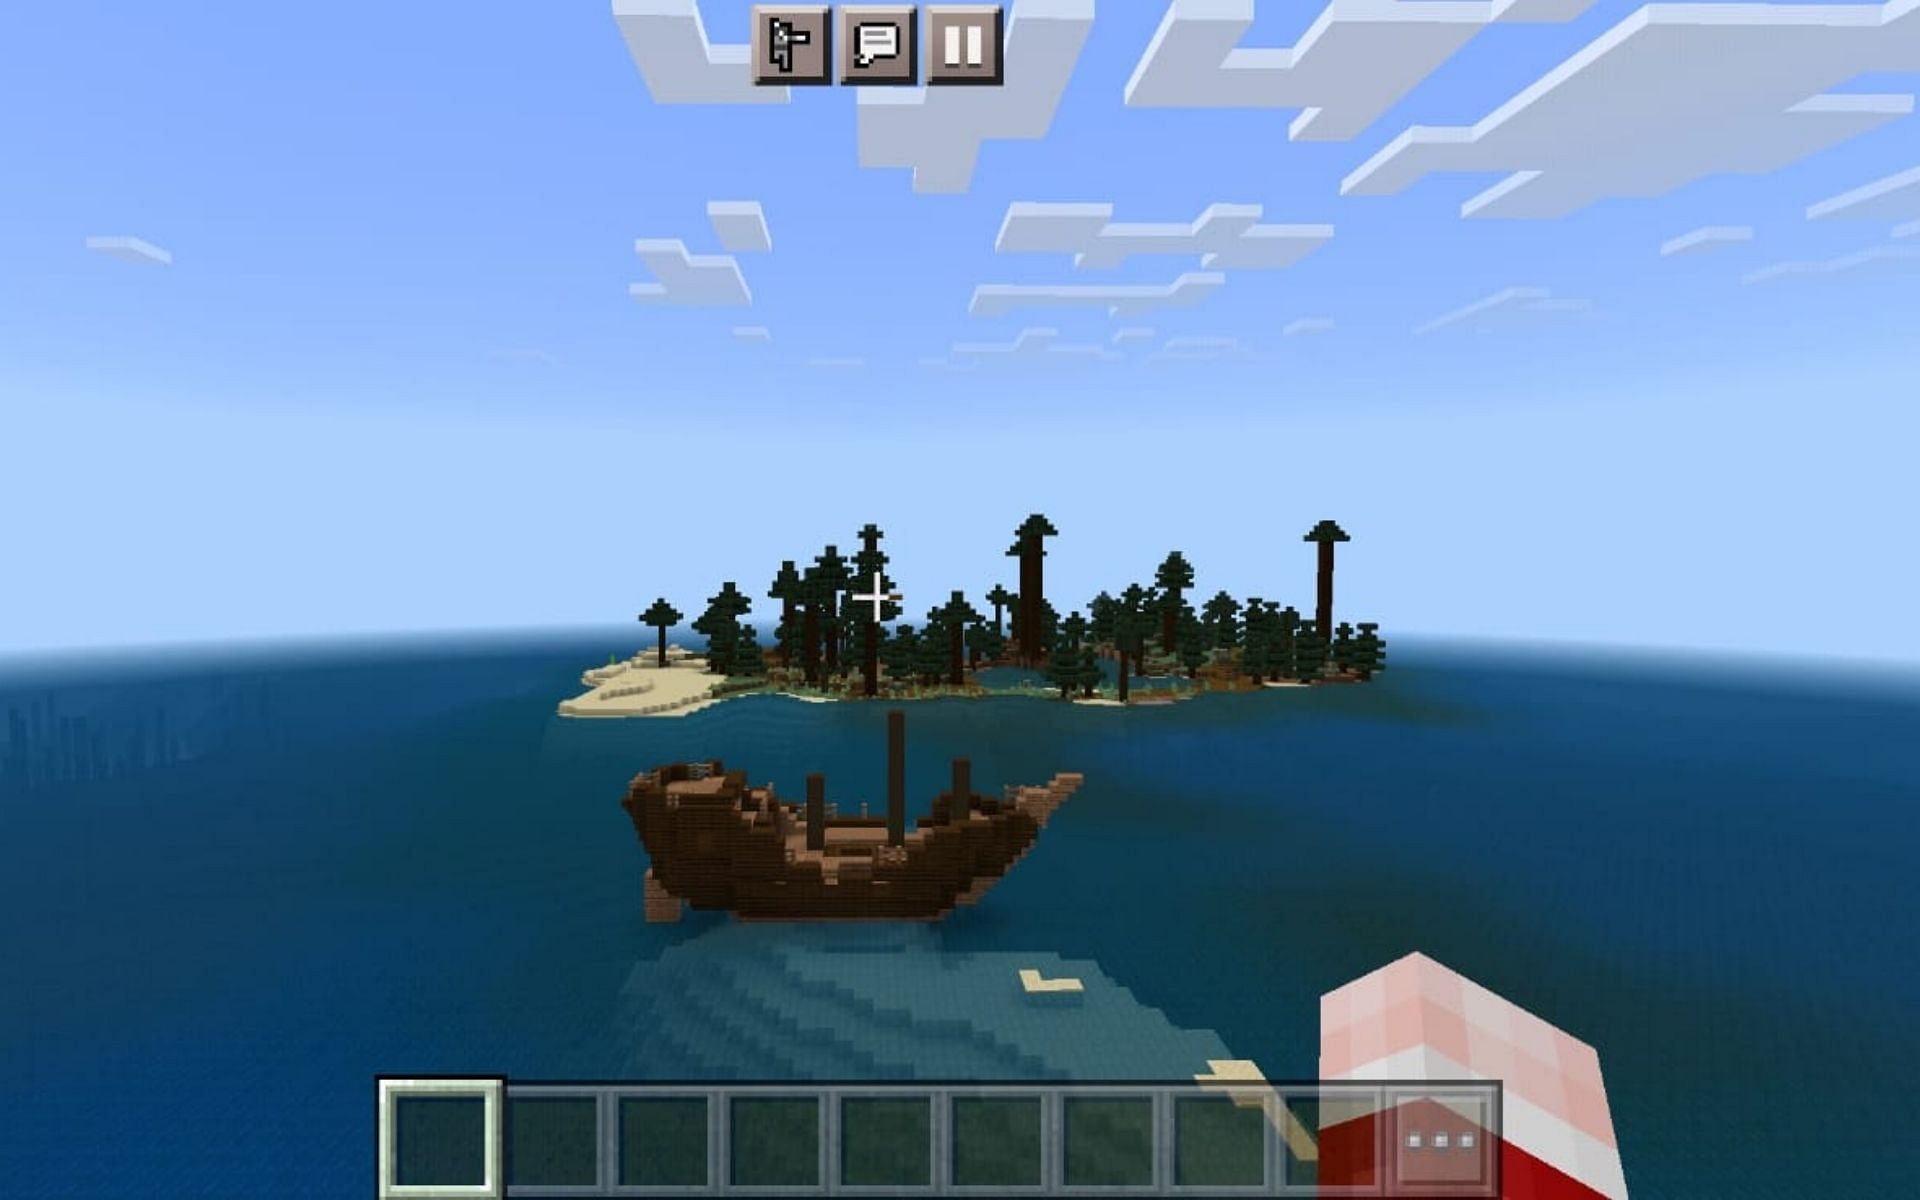 Rare intact ship floating on the ocean (Image via Minecraft)